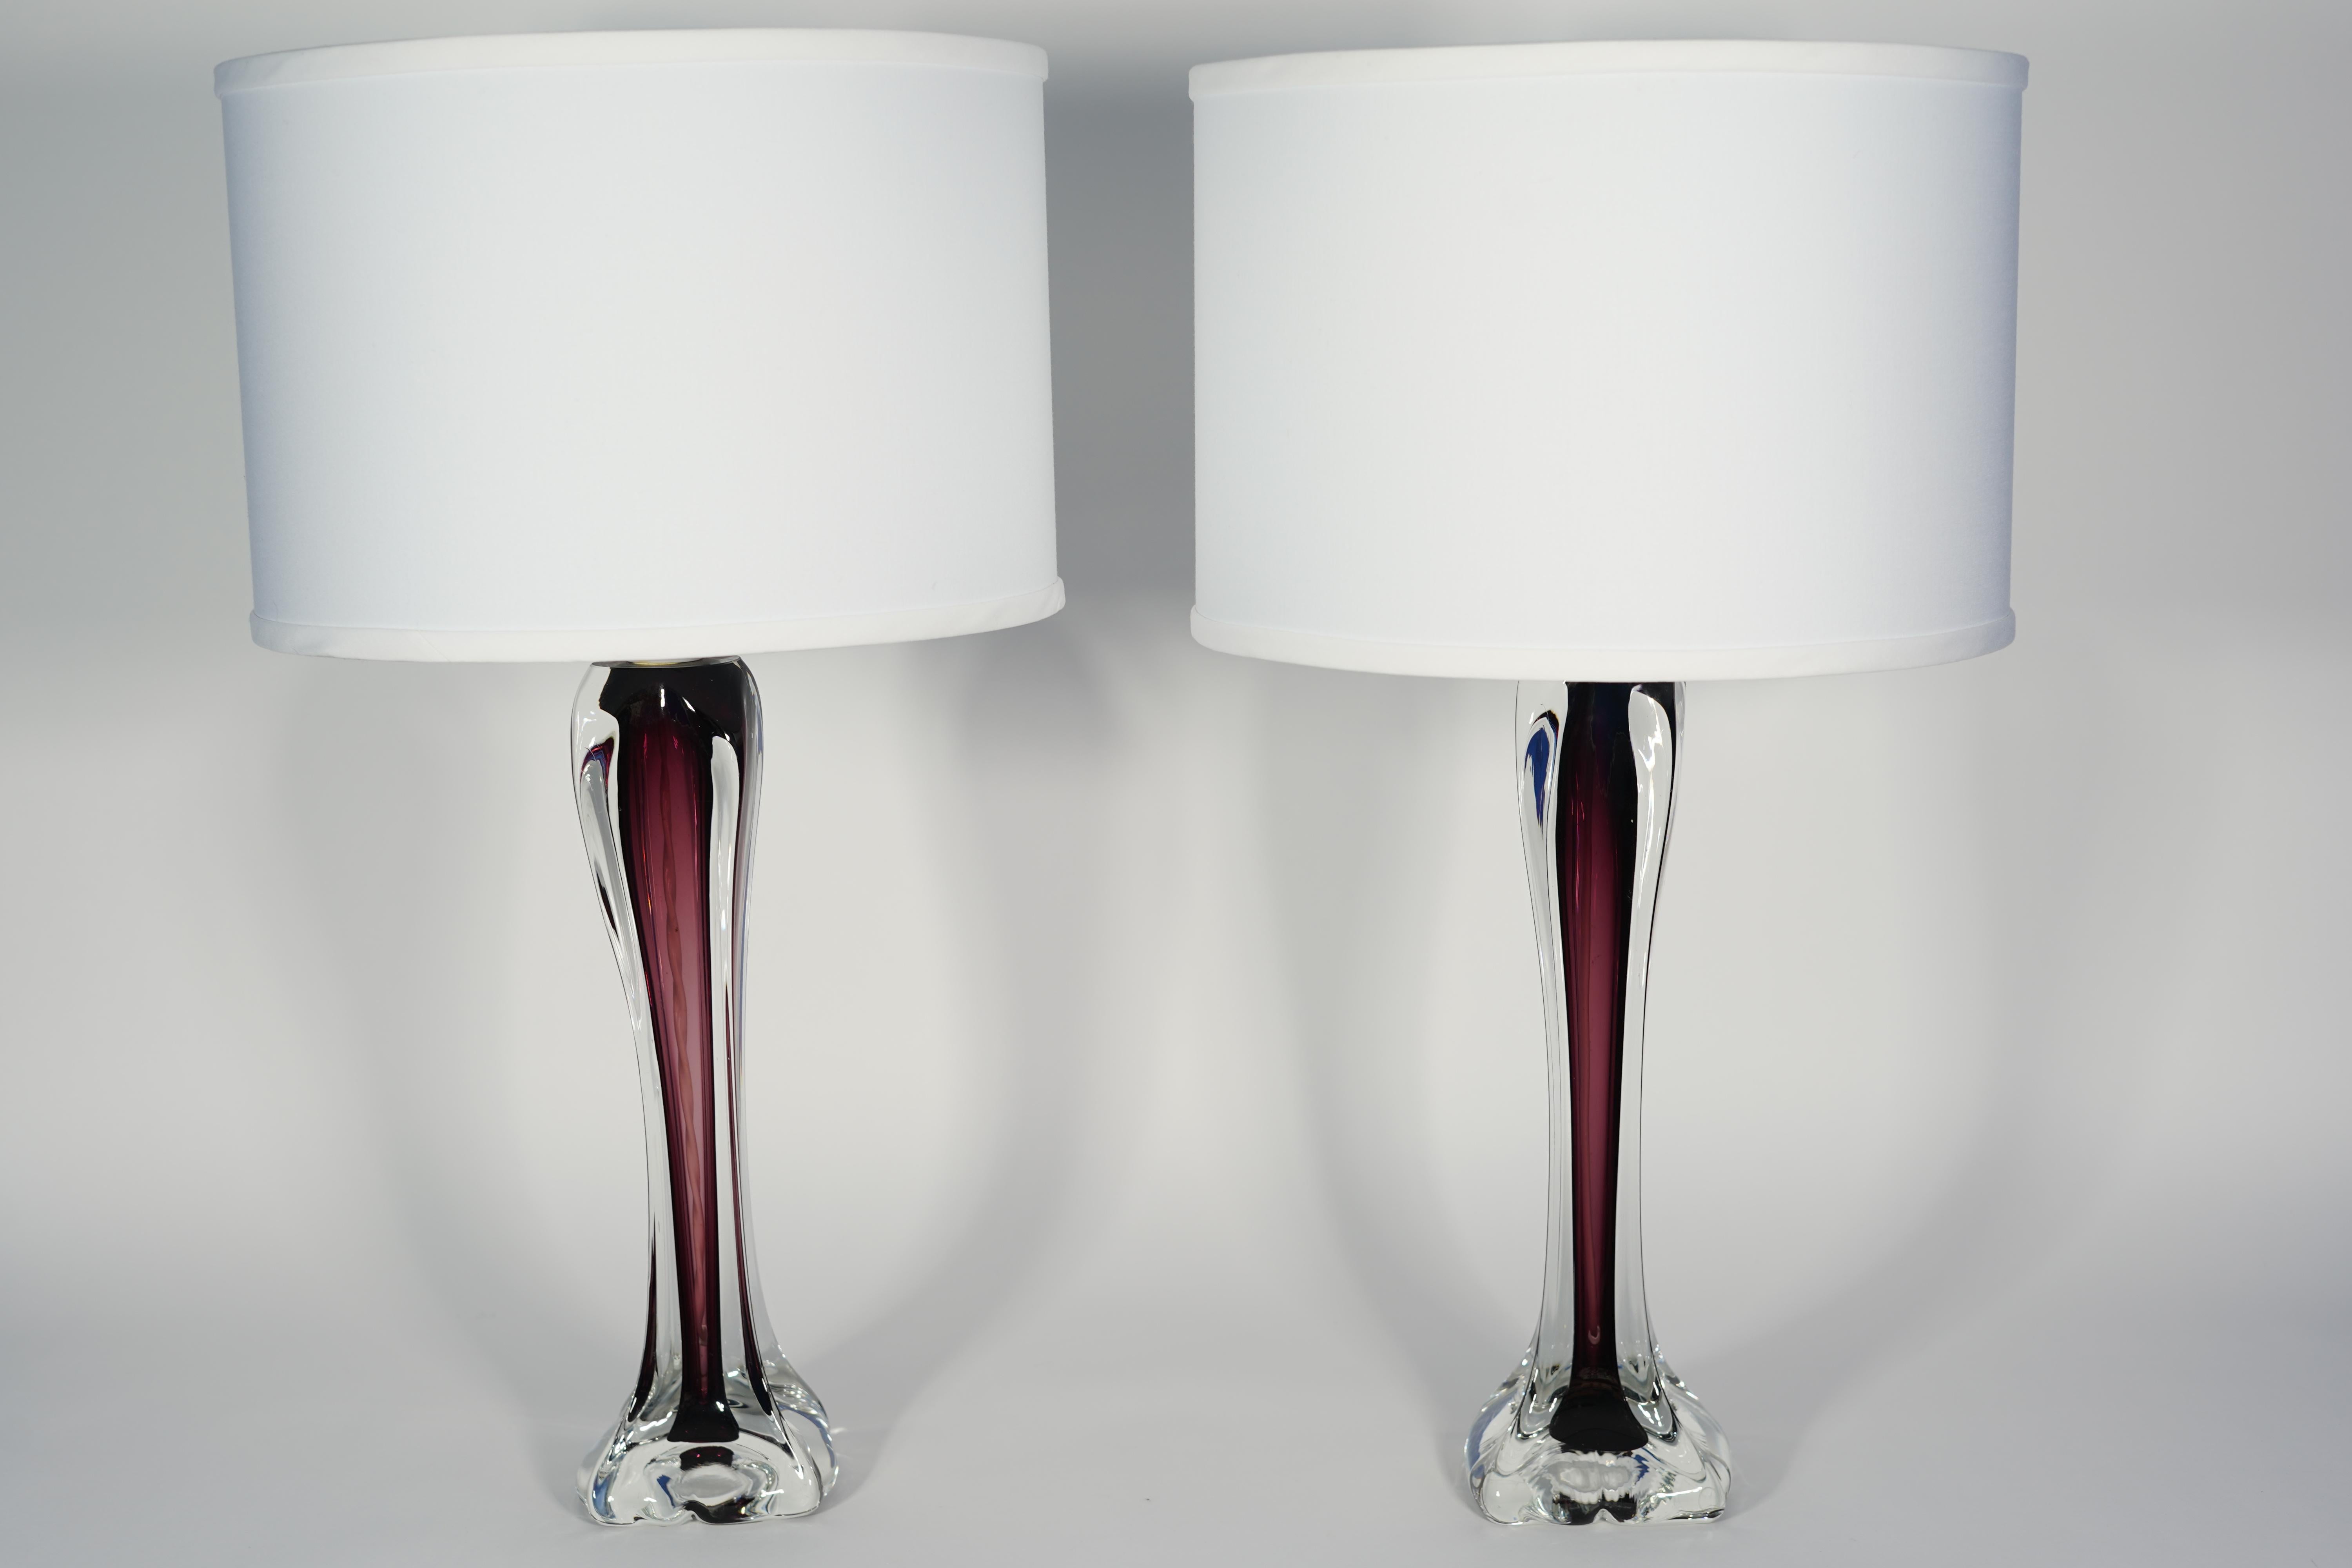 Pair of table lamps by Flygsfors purple glass incased in a clear outer surface, Sweden, 1970.

Rewired for the US.